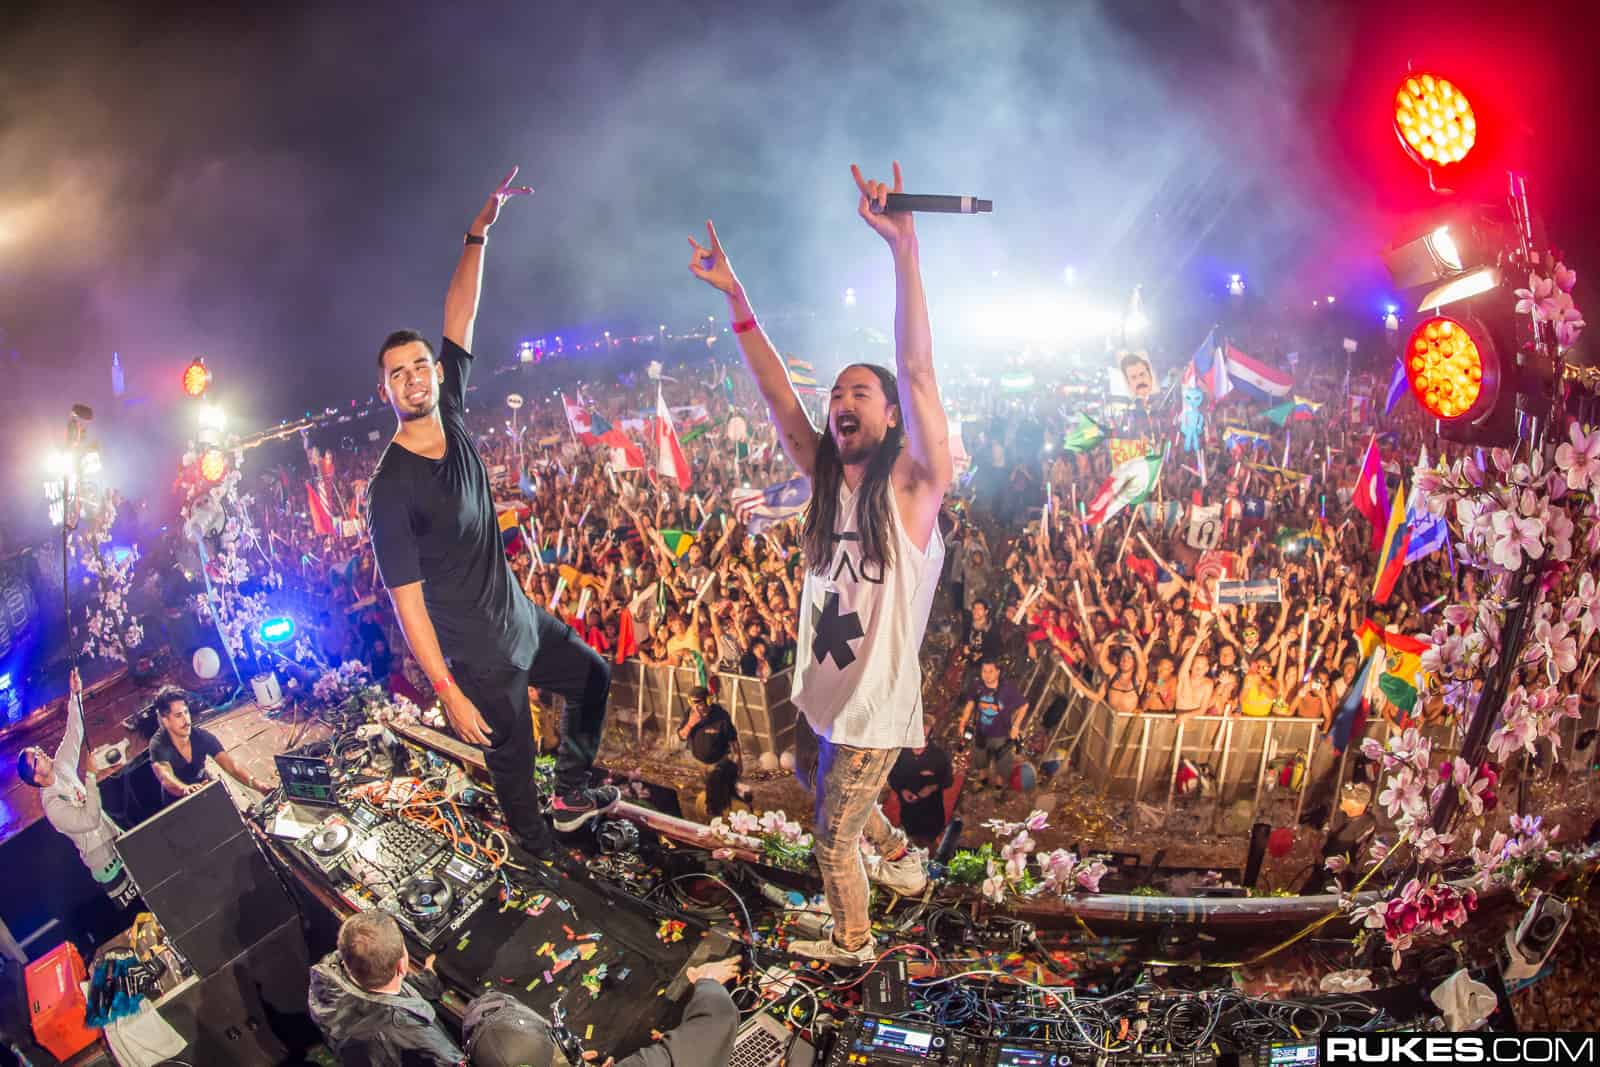 Afrojack & Steve Aoki collab ‘No Beef’ turns 9 years old